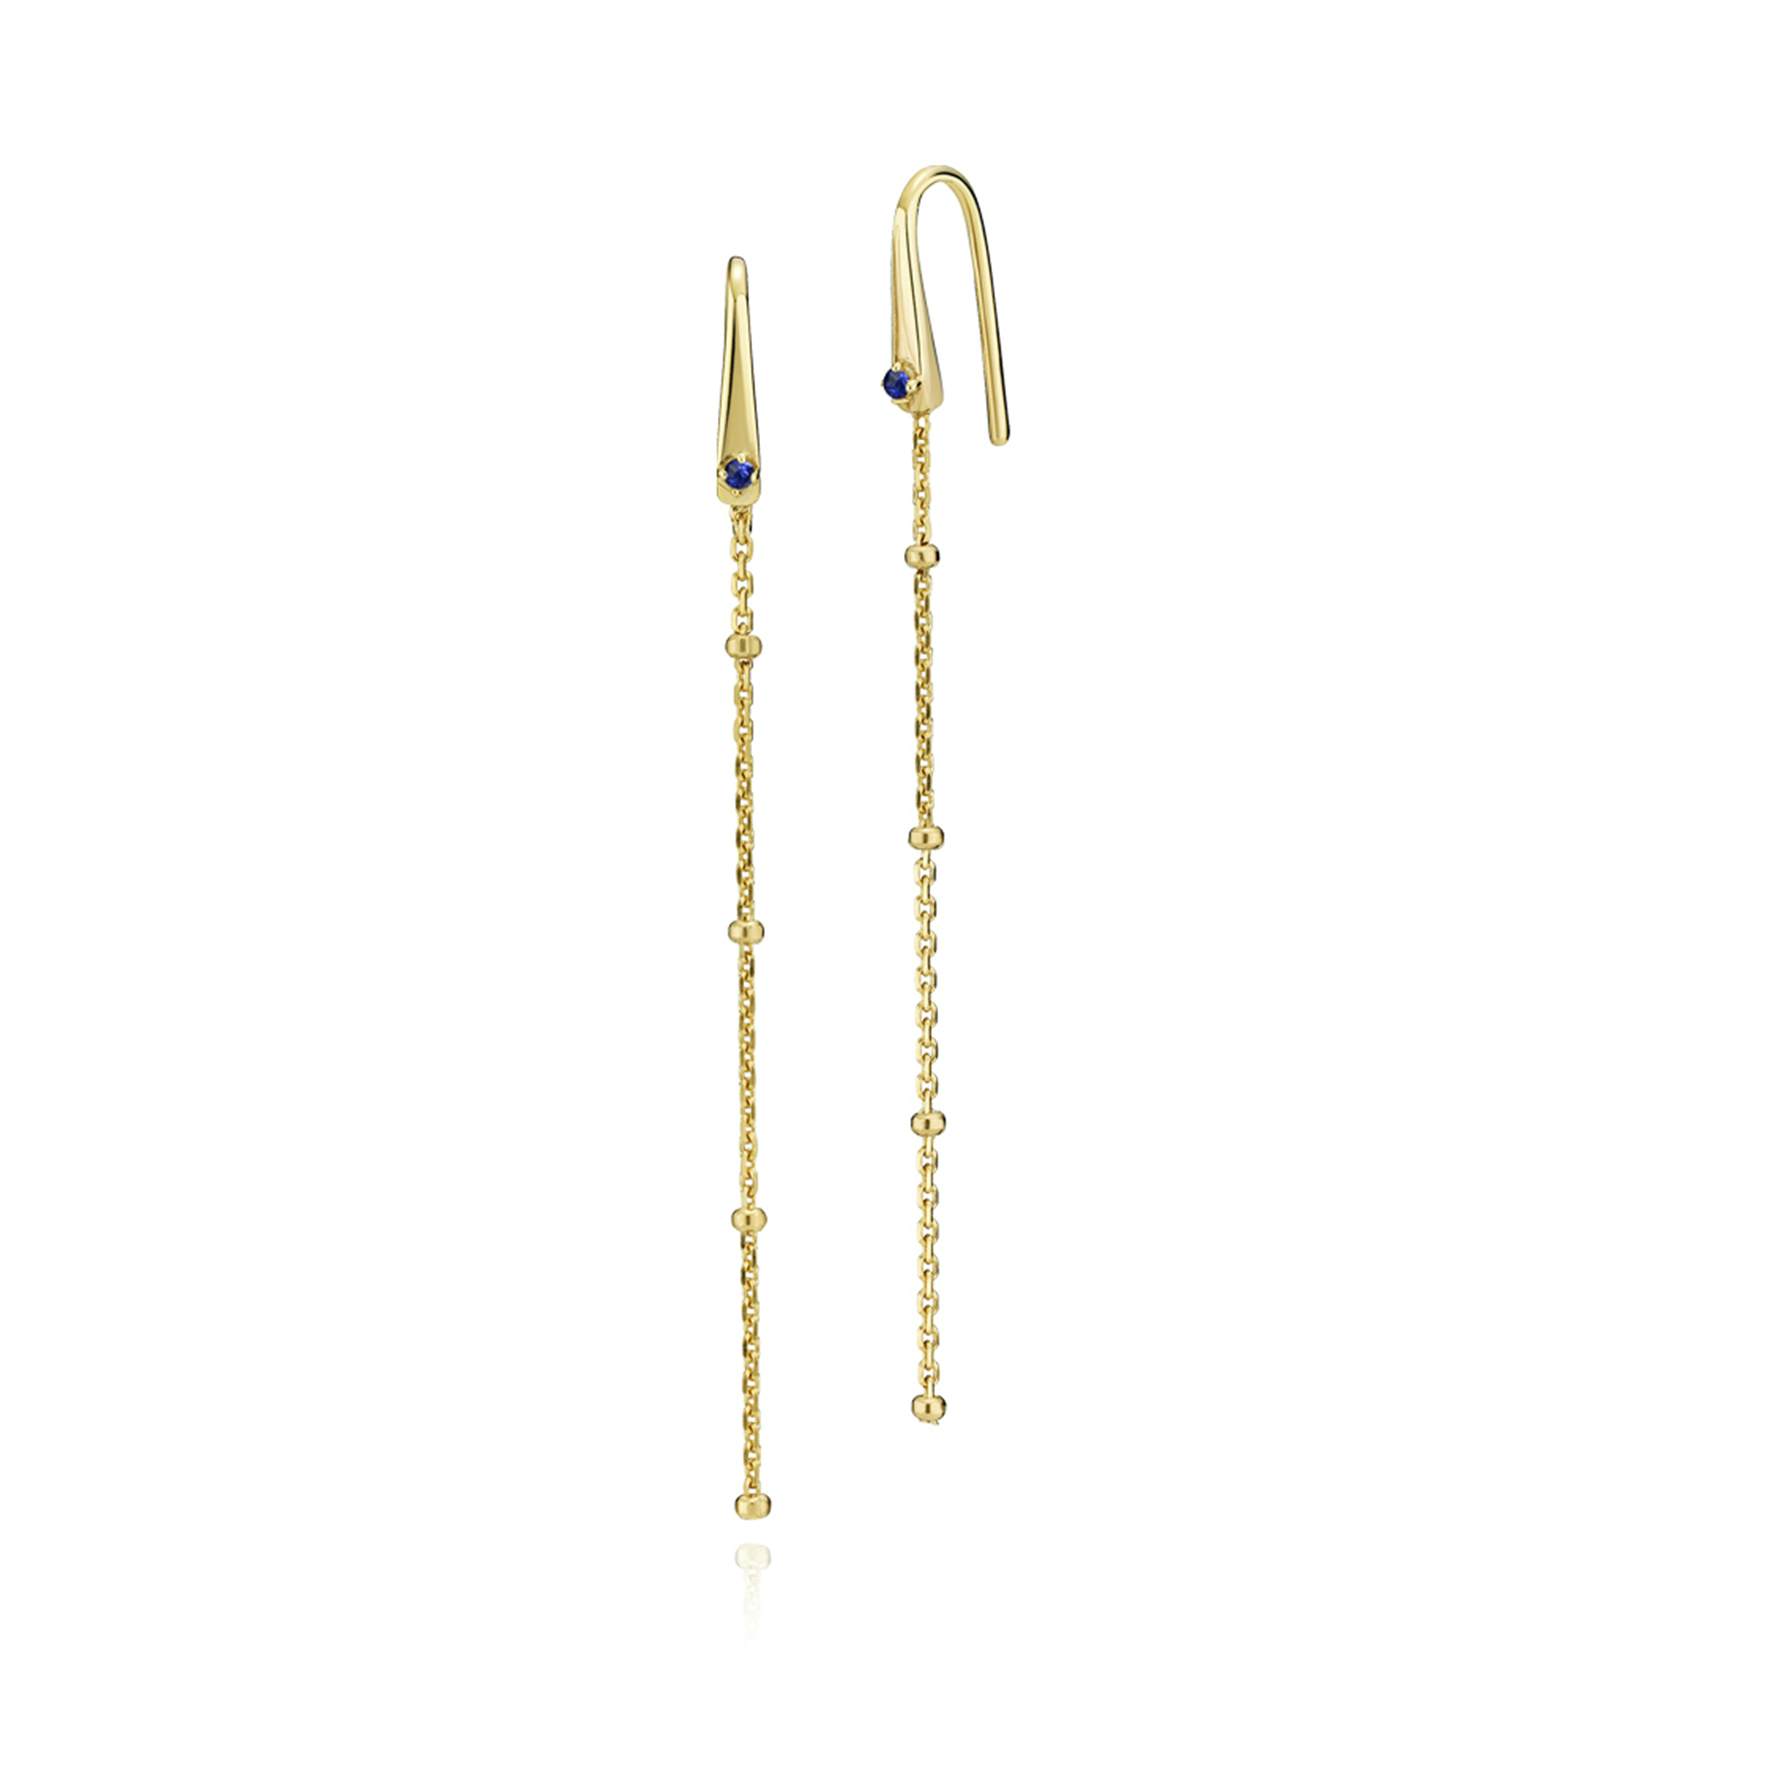 Anabel By Sistie Earchains from Sistie in Goldplated-Silver Sterling 925